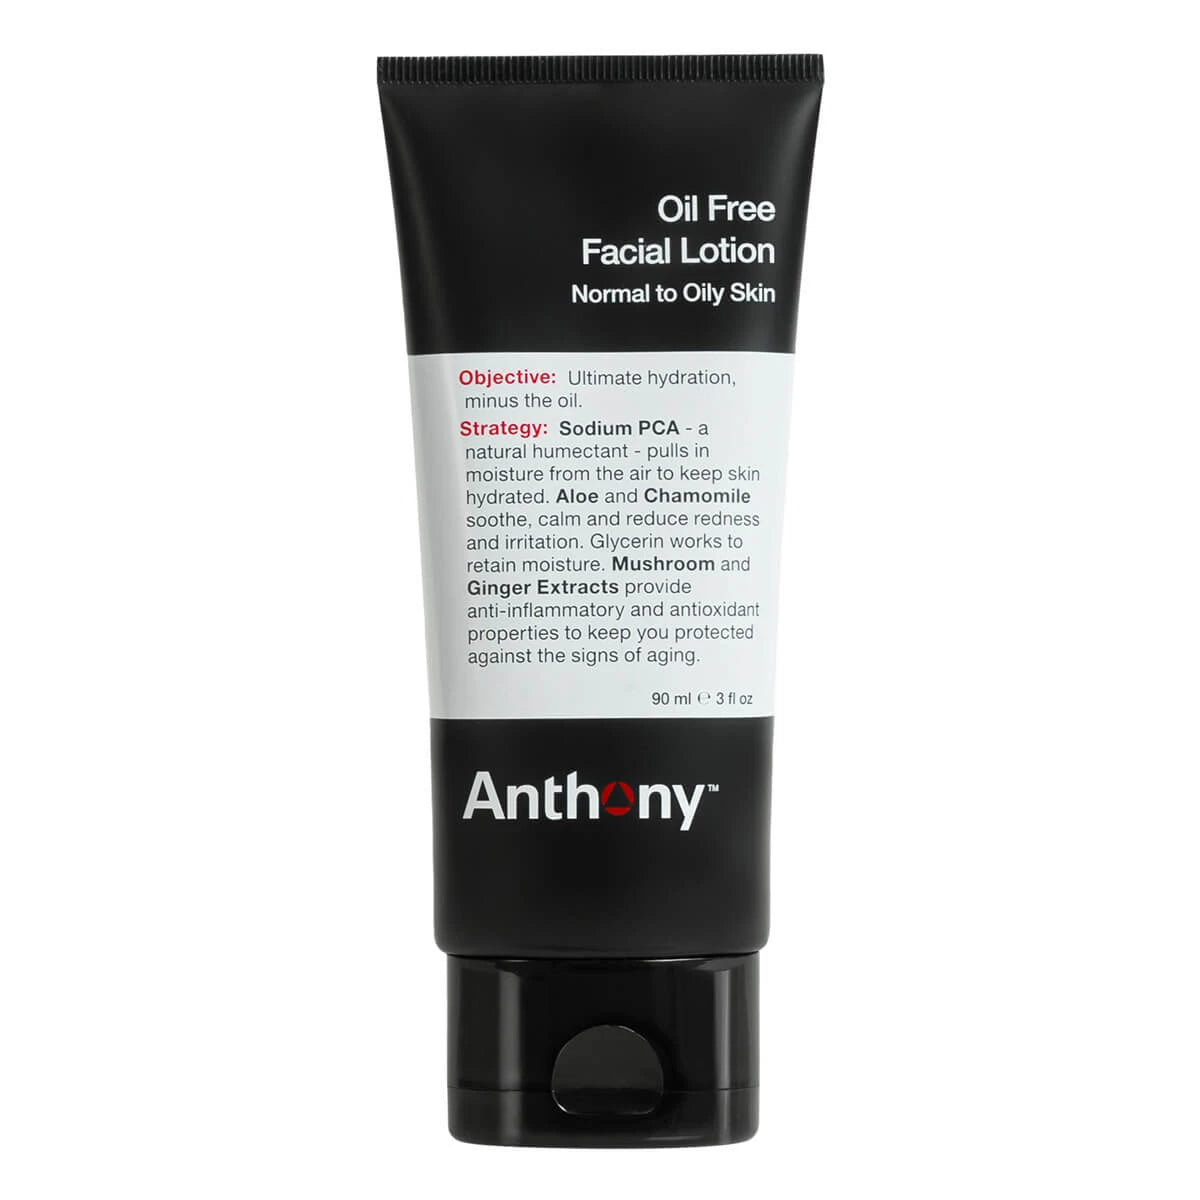 Anthony Oil Free Facial Lotion, 90 ml.